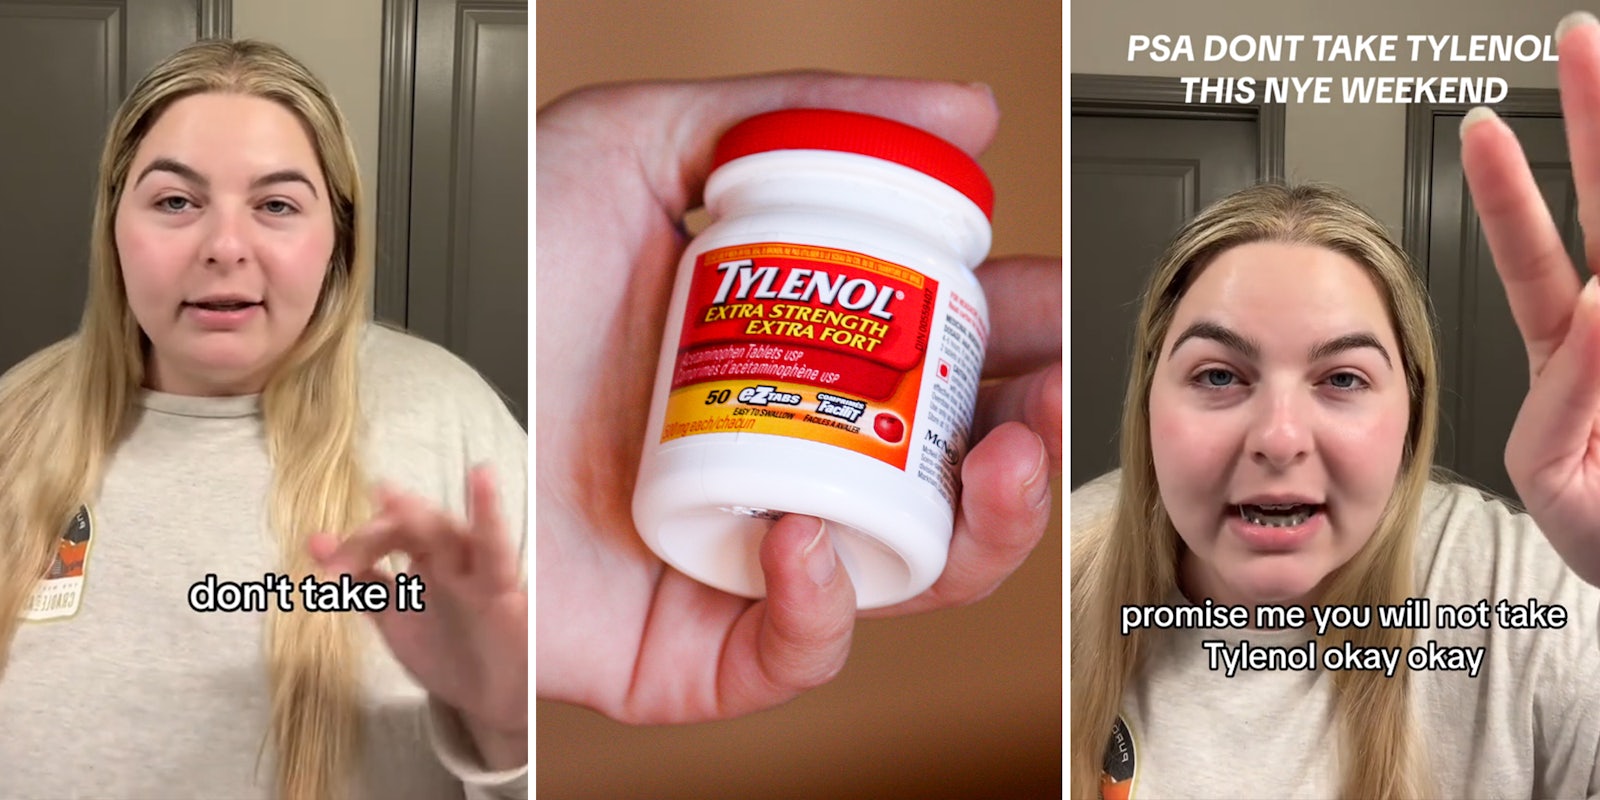 Woman shares why you shouldn’t take Tylenol on New Year’s Eve